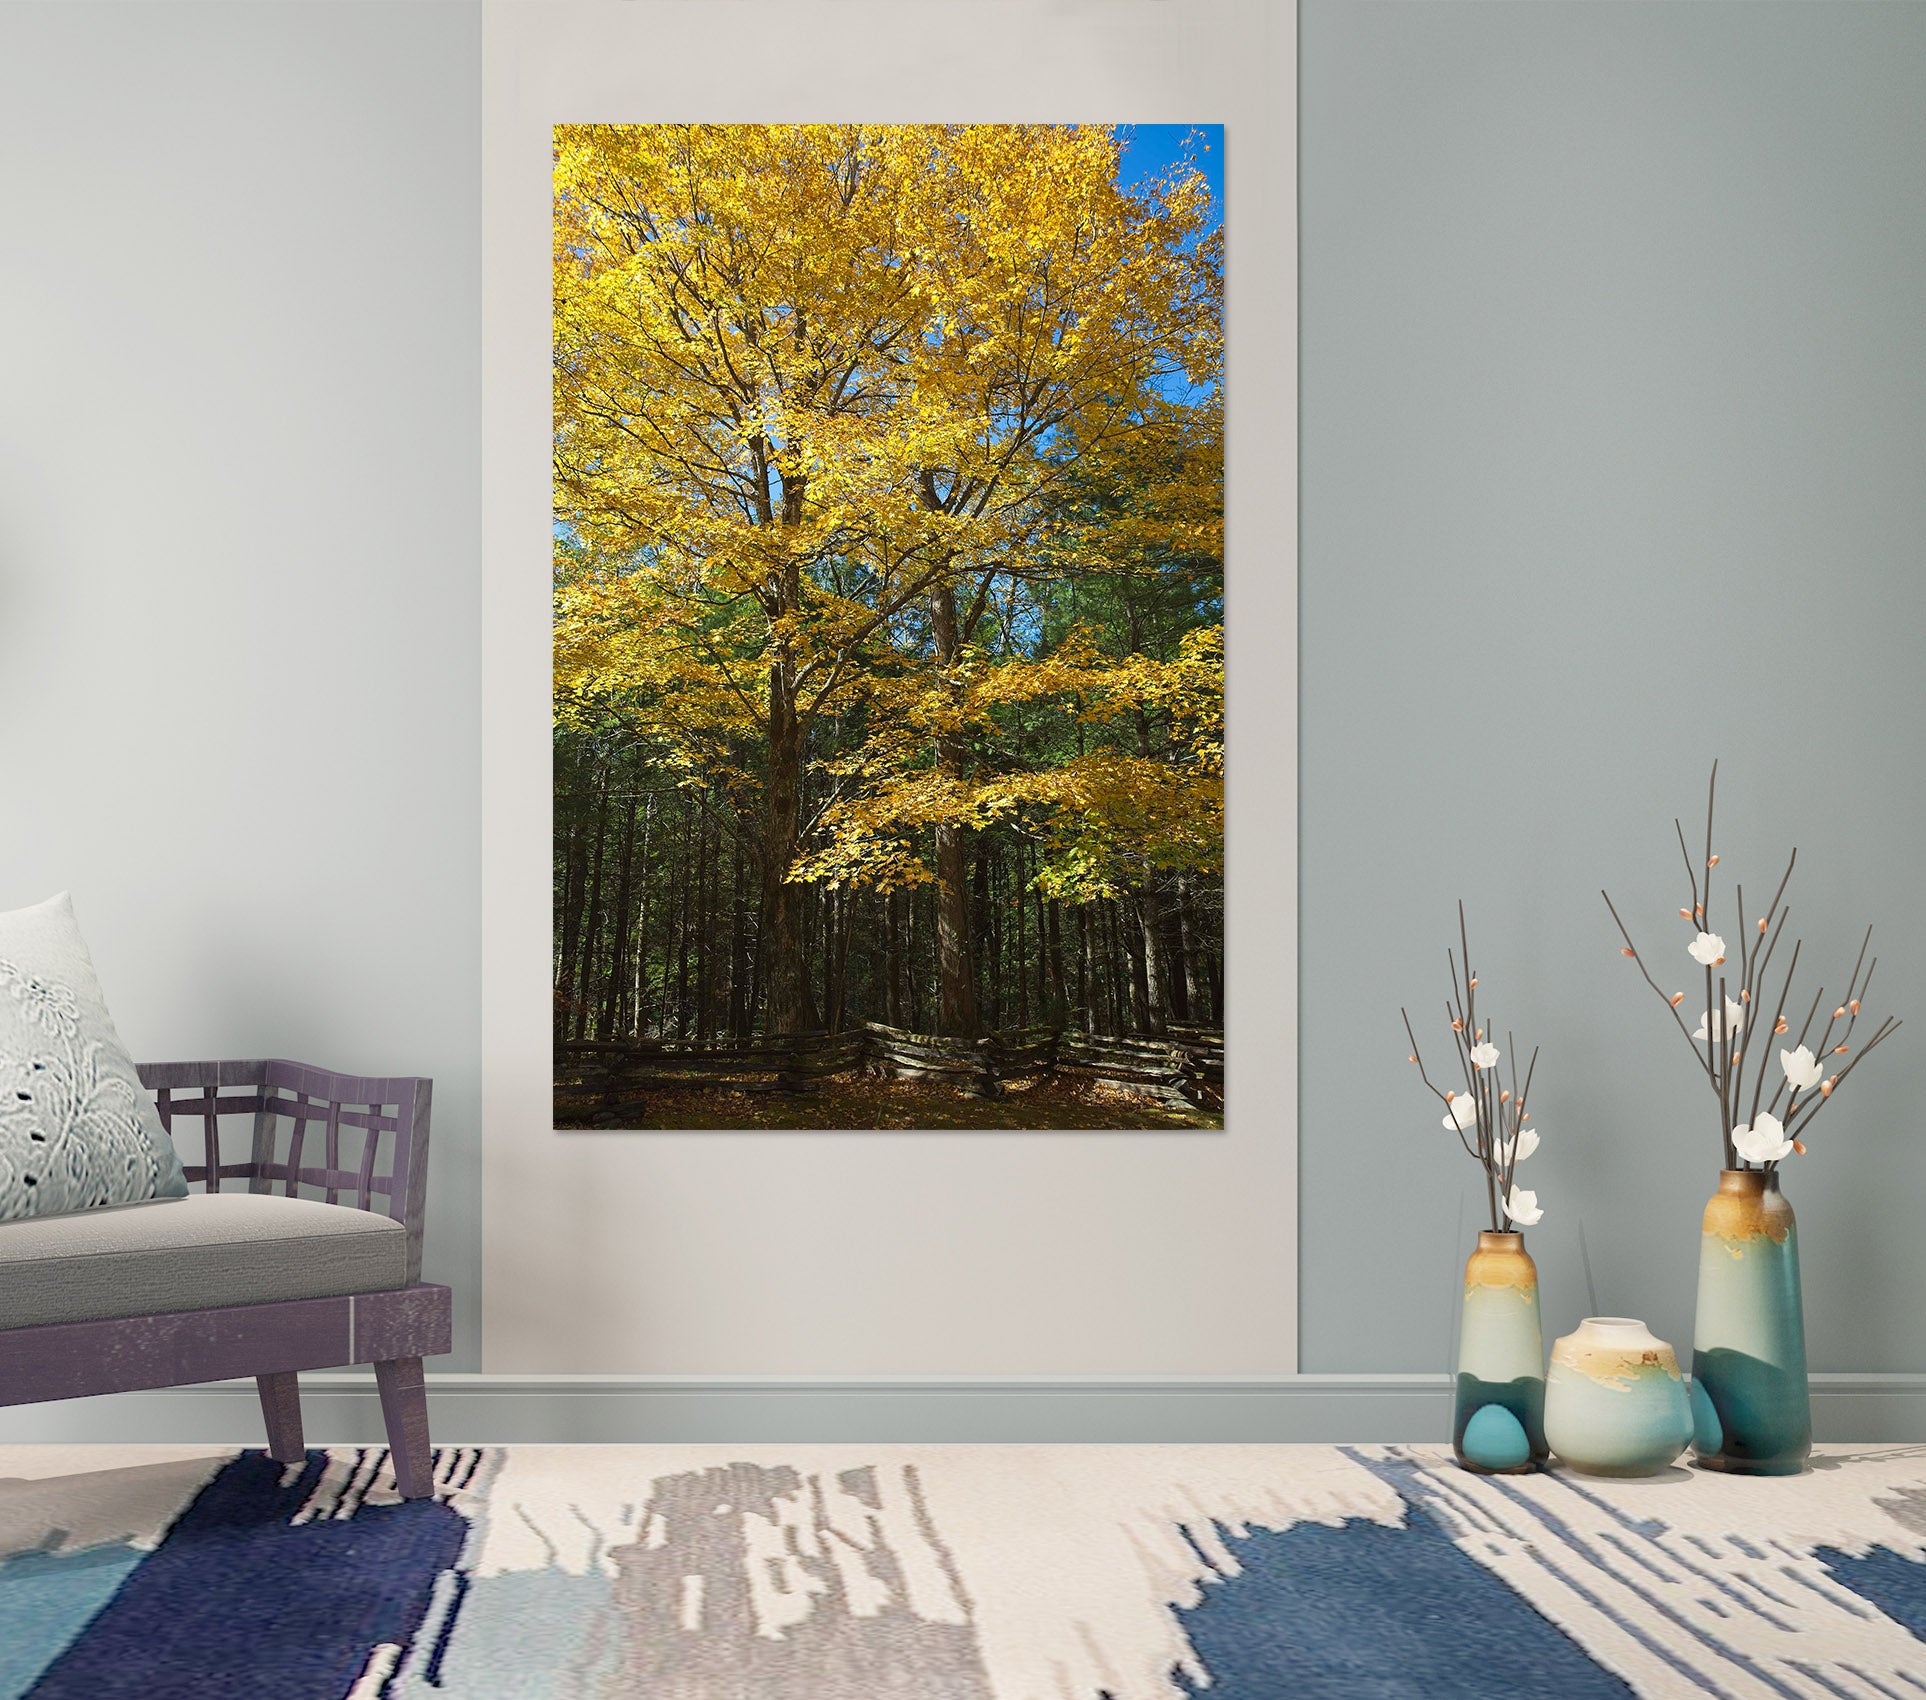 3D Sunny Forest 041 Kathy Barefield Wall Sticker